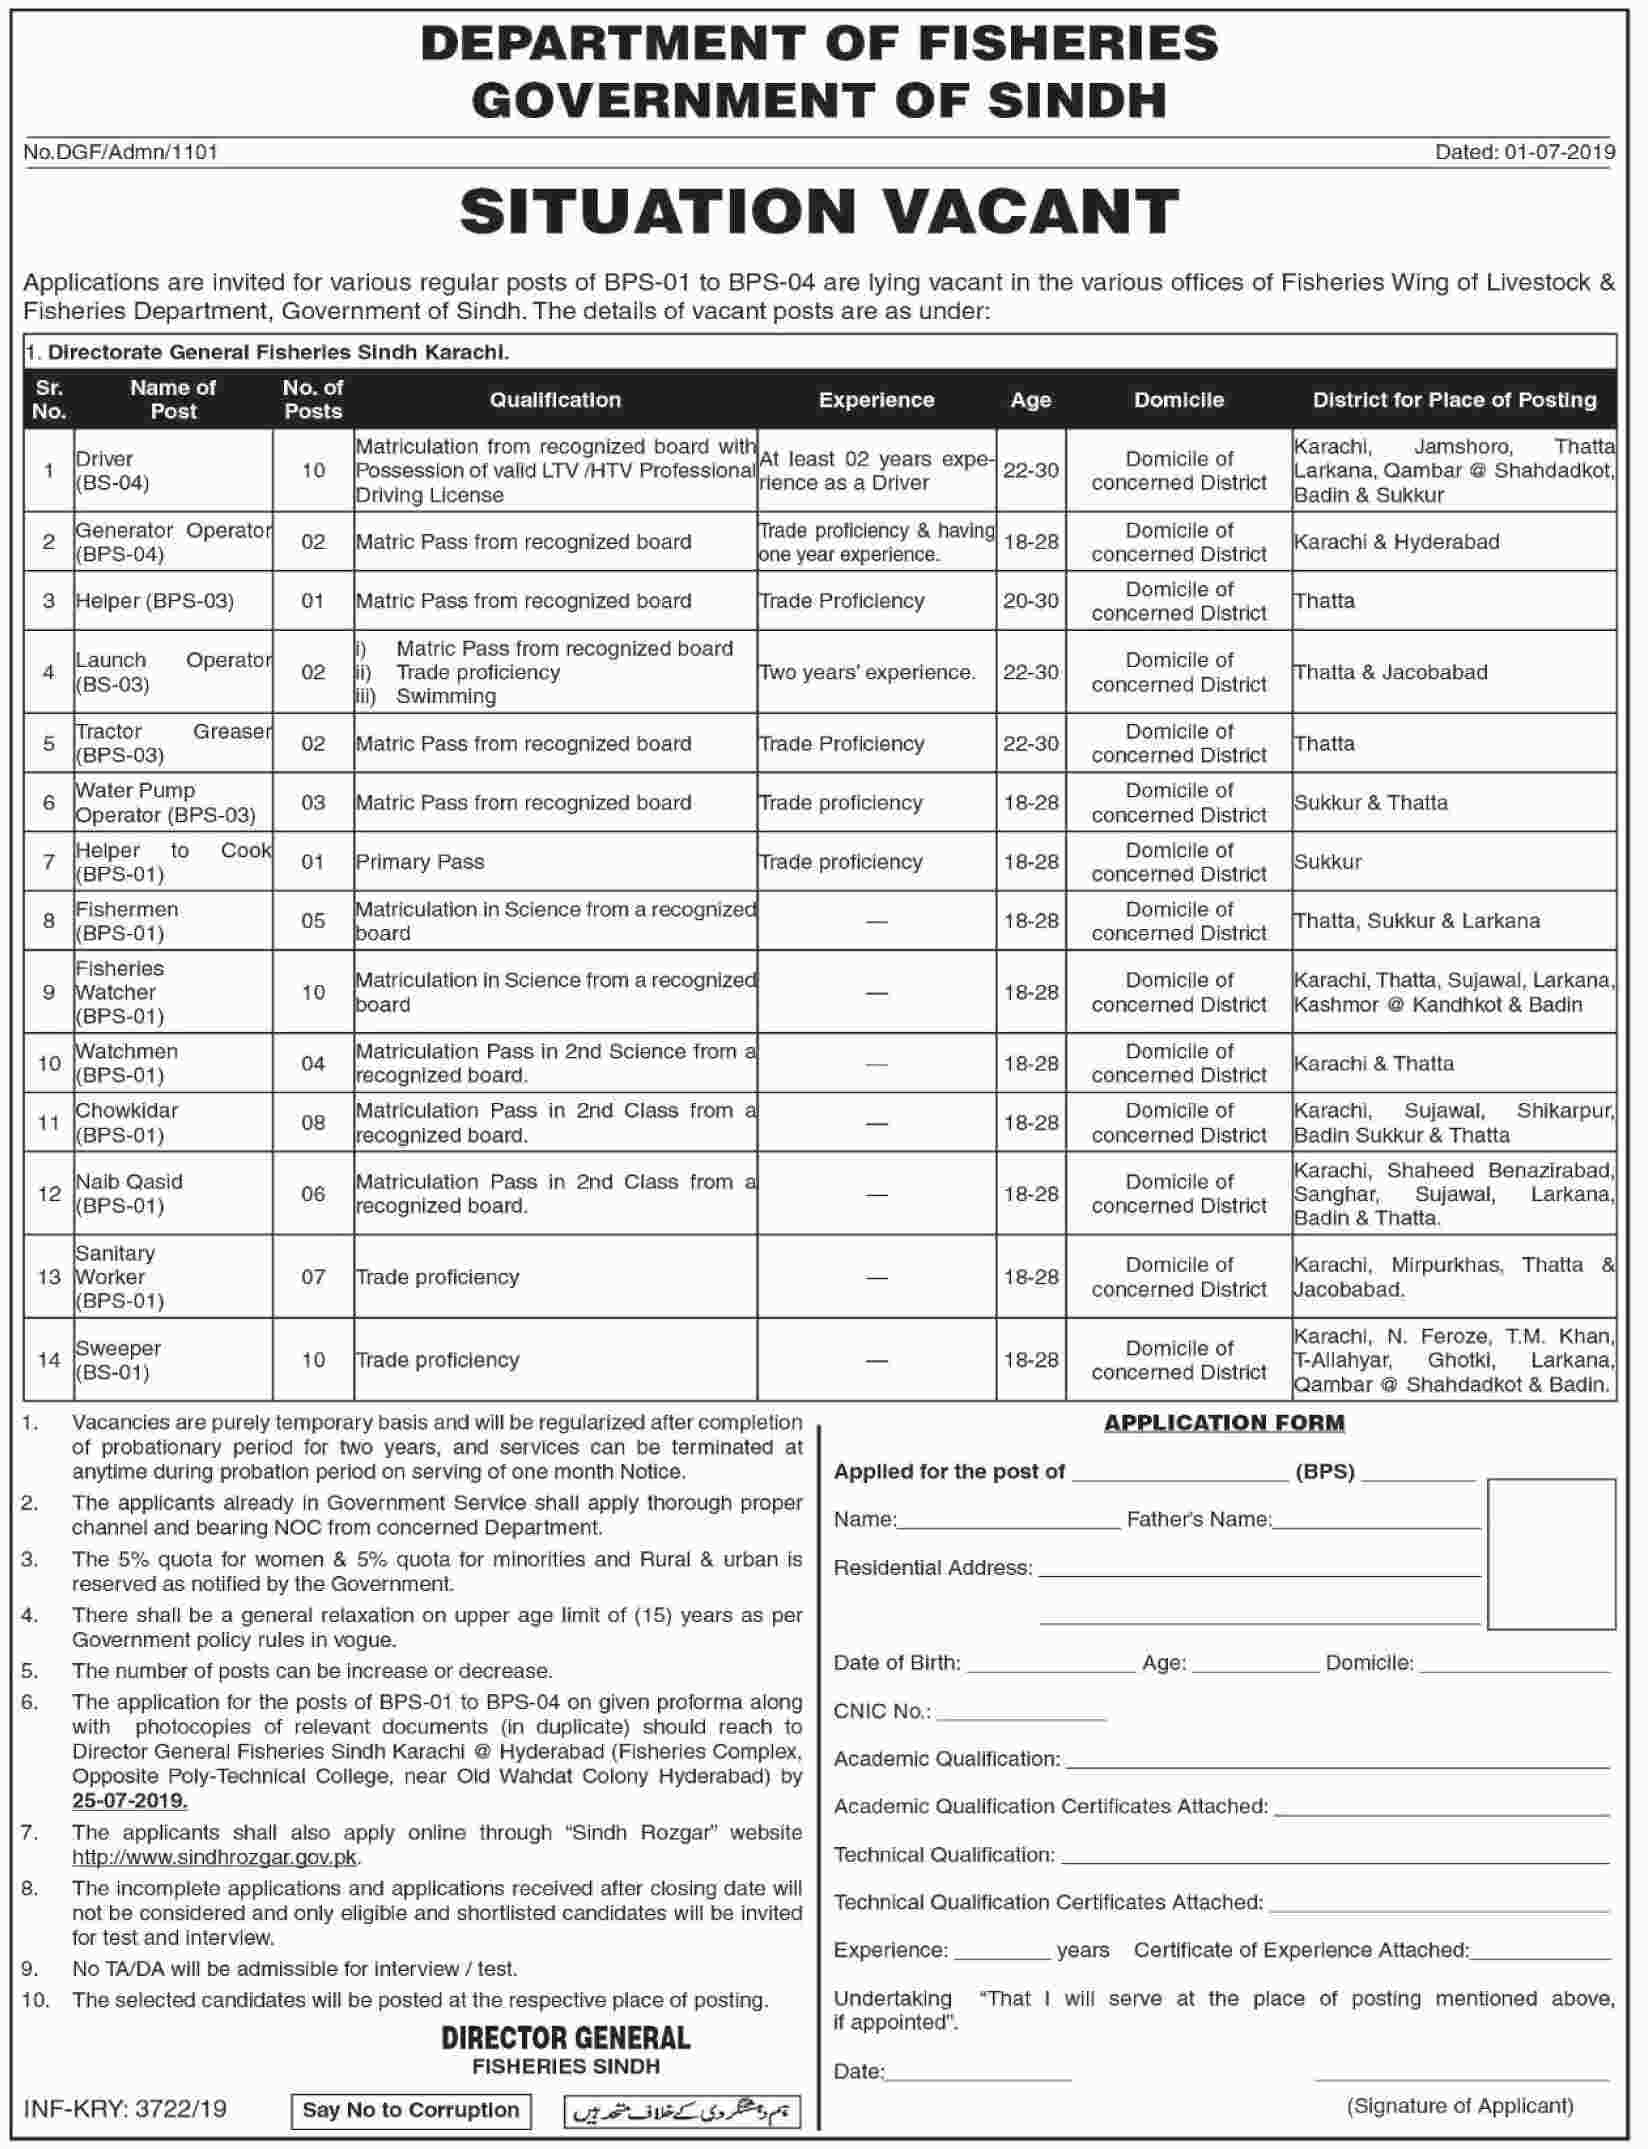 Govt of Sindh Livestock and Fisheries Department jobs 2019